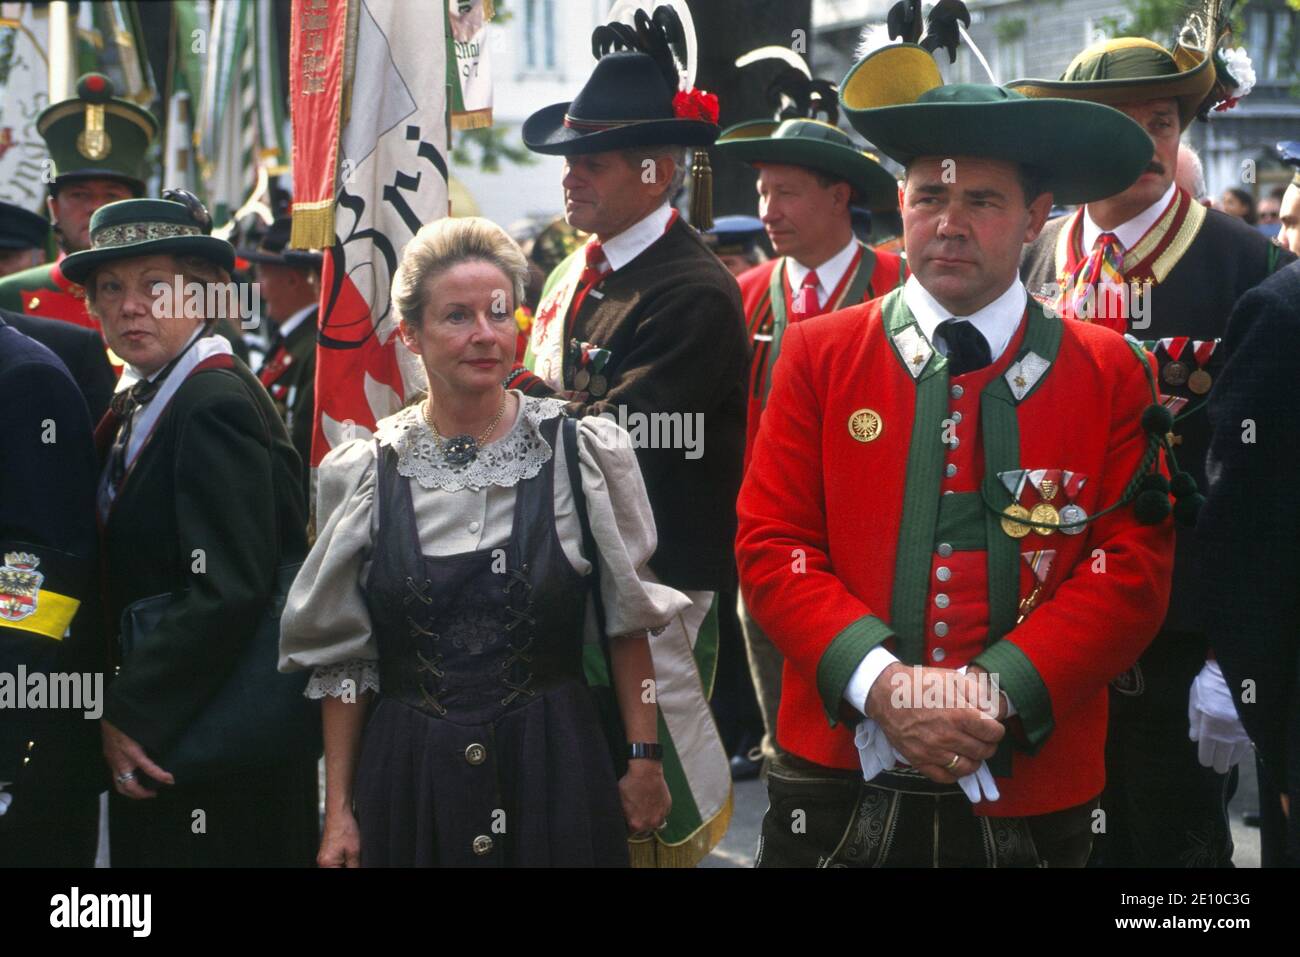 On October 5, 1997 is relocated in Trieste, Italian city but long under the Austro-Hungarian Empire, the monument, removed in 1921, to Princess Elizabeth of Austria 'Sissi', wife of Emperor Franz Joseph. For the occasion gathers a large number of nostalgic and fans of the Empire, with uniforms and vintage clothes. Stock Photo